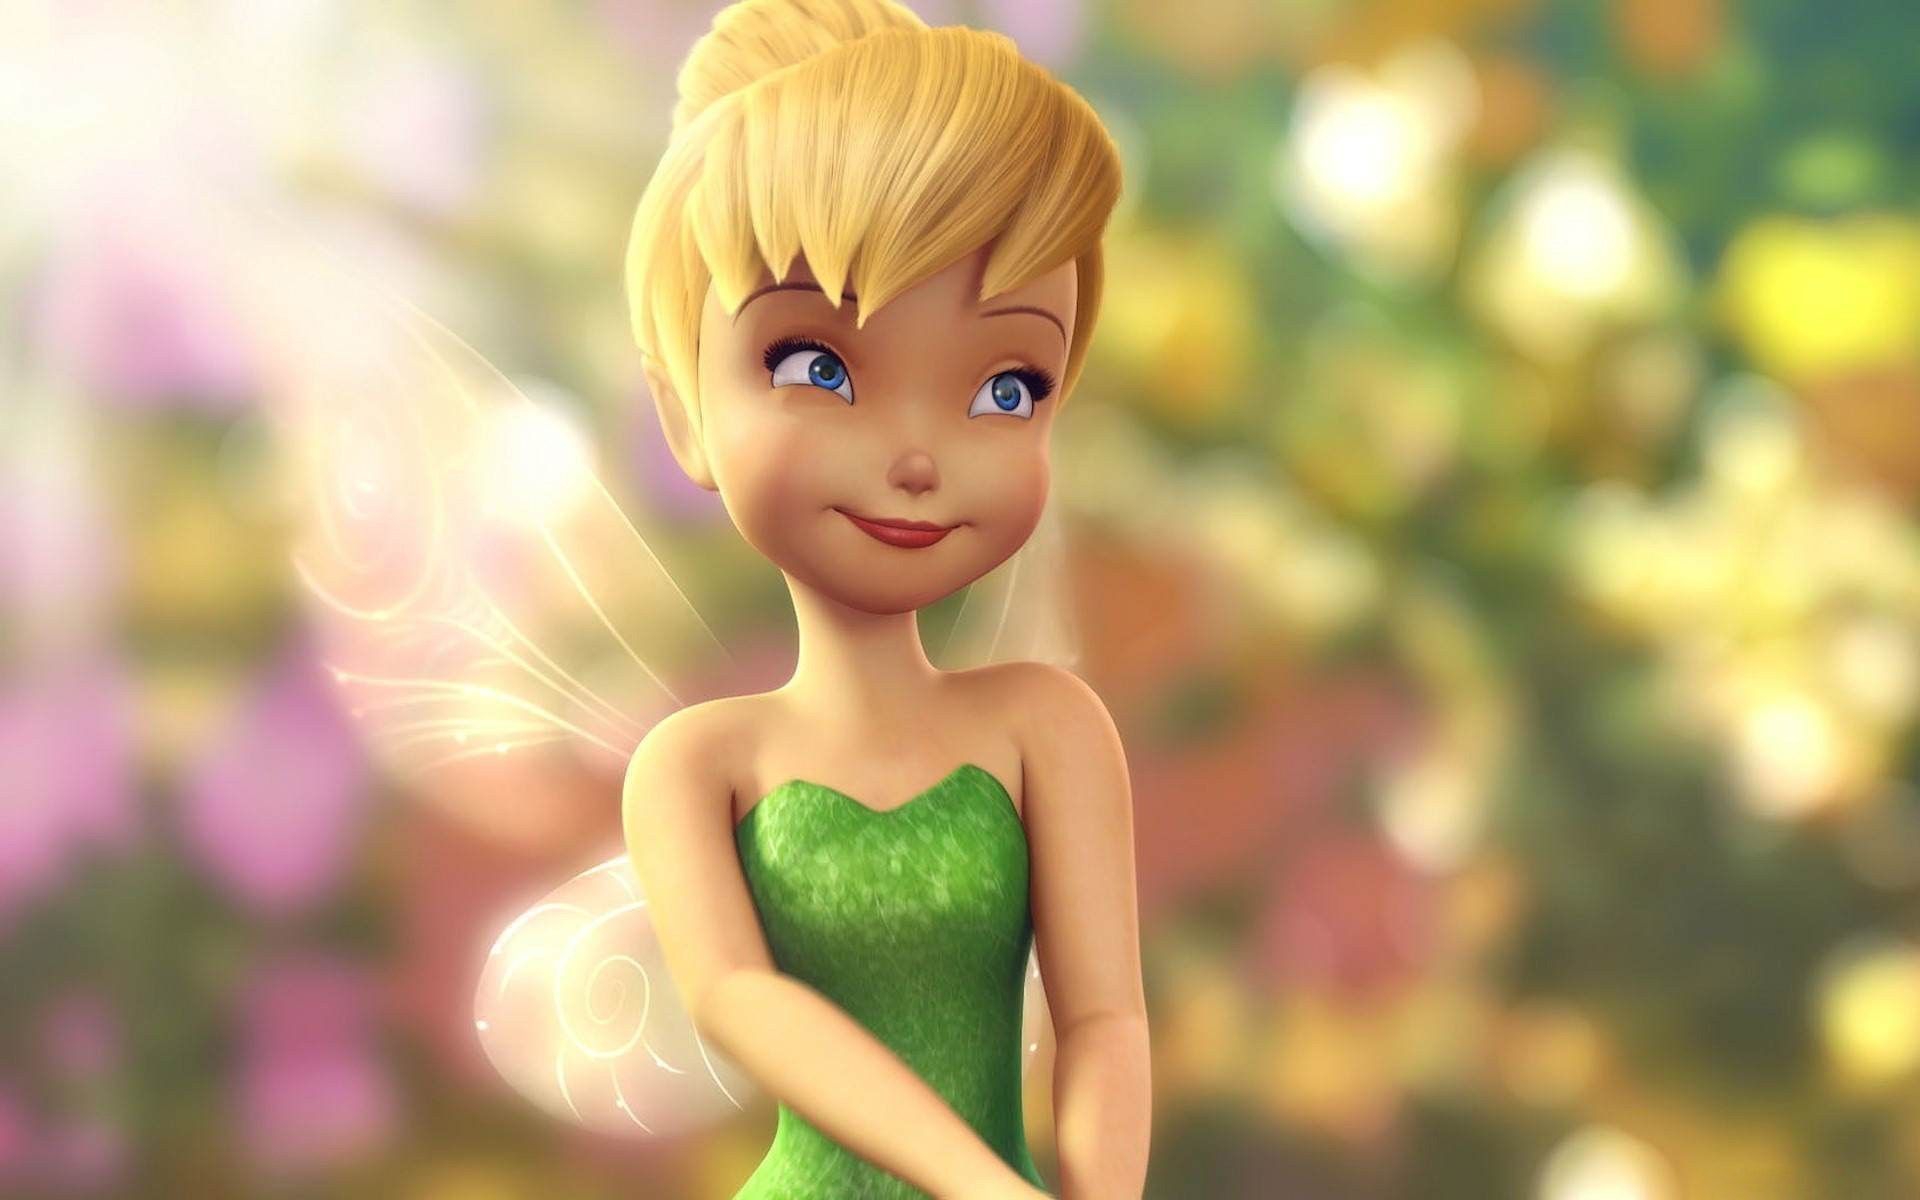 tinkerbell wallpaper for computers hd